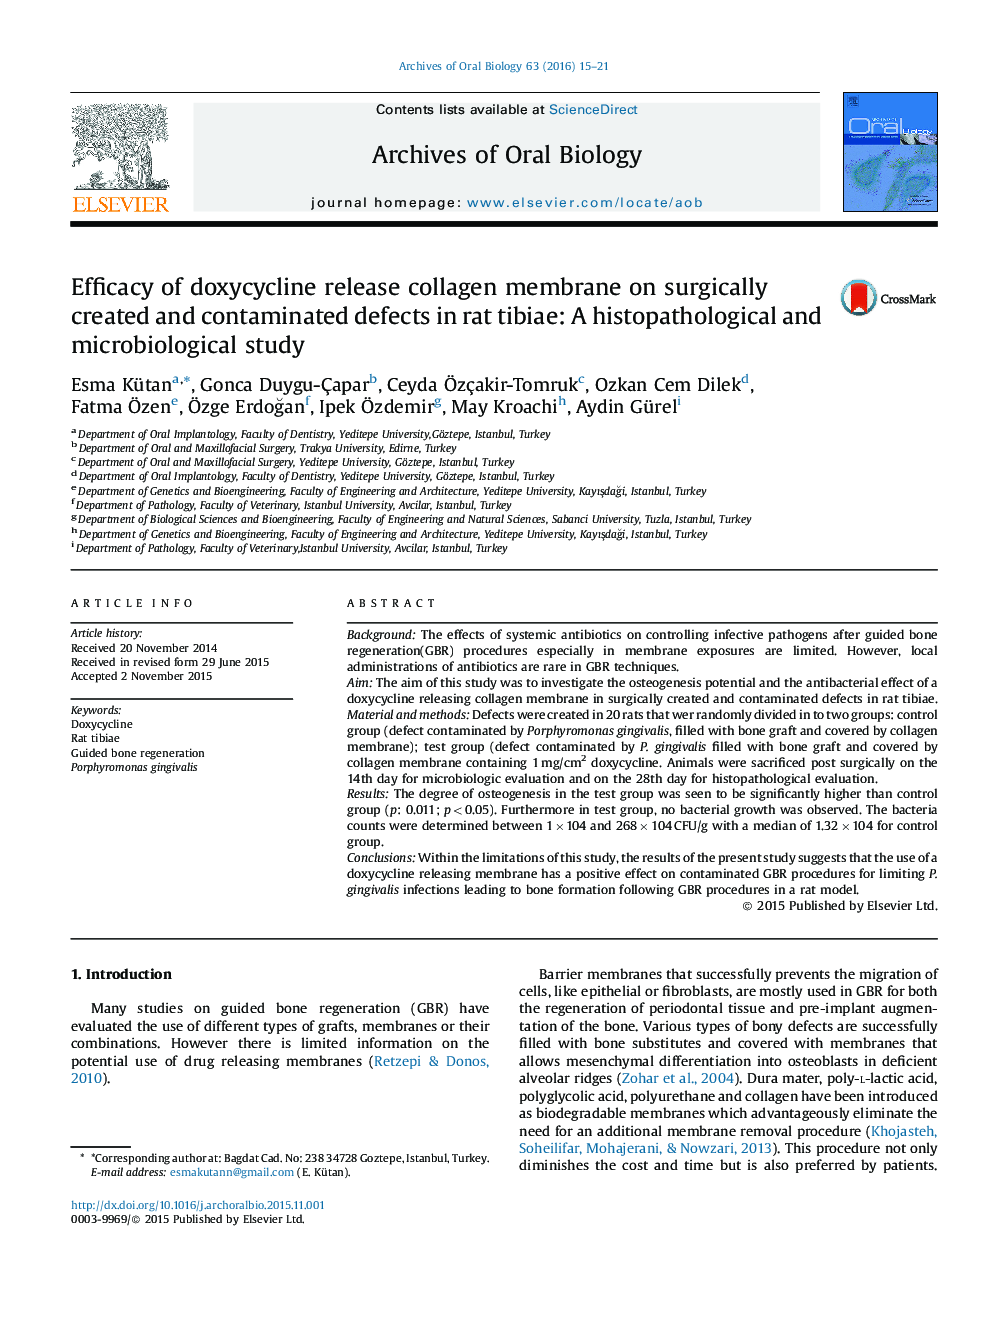 Efficacy of doxycycline release collagen membrane on surgically created and contaminated defects in rat tibiae: A histopathological and microbiological study